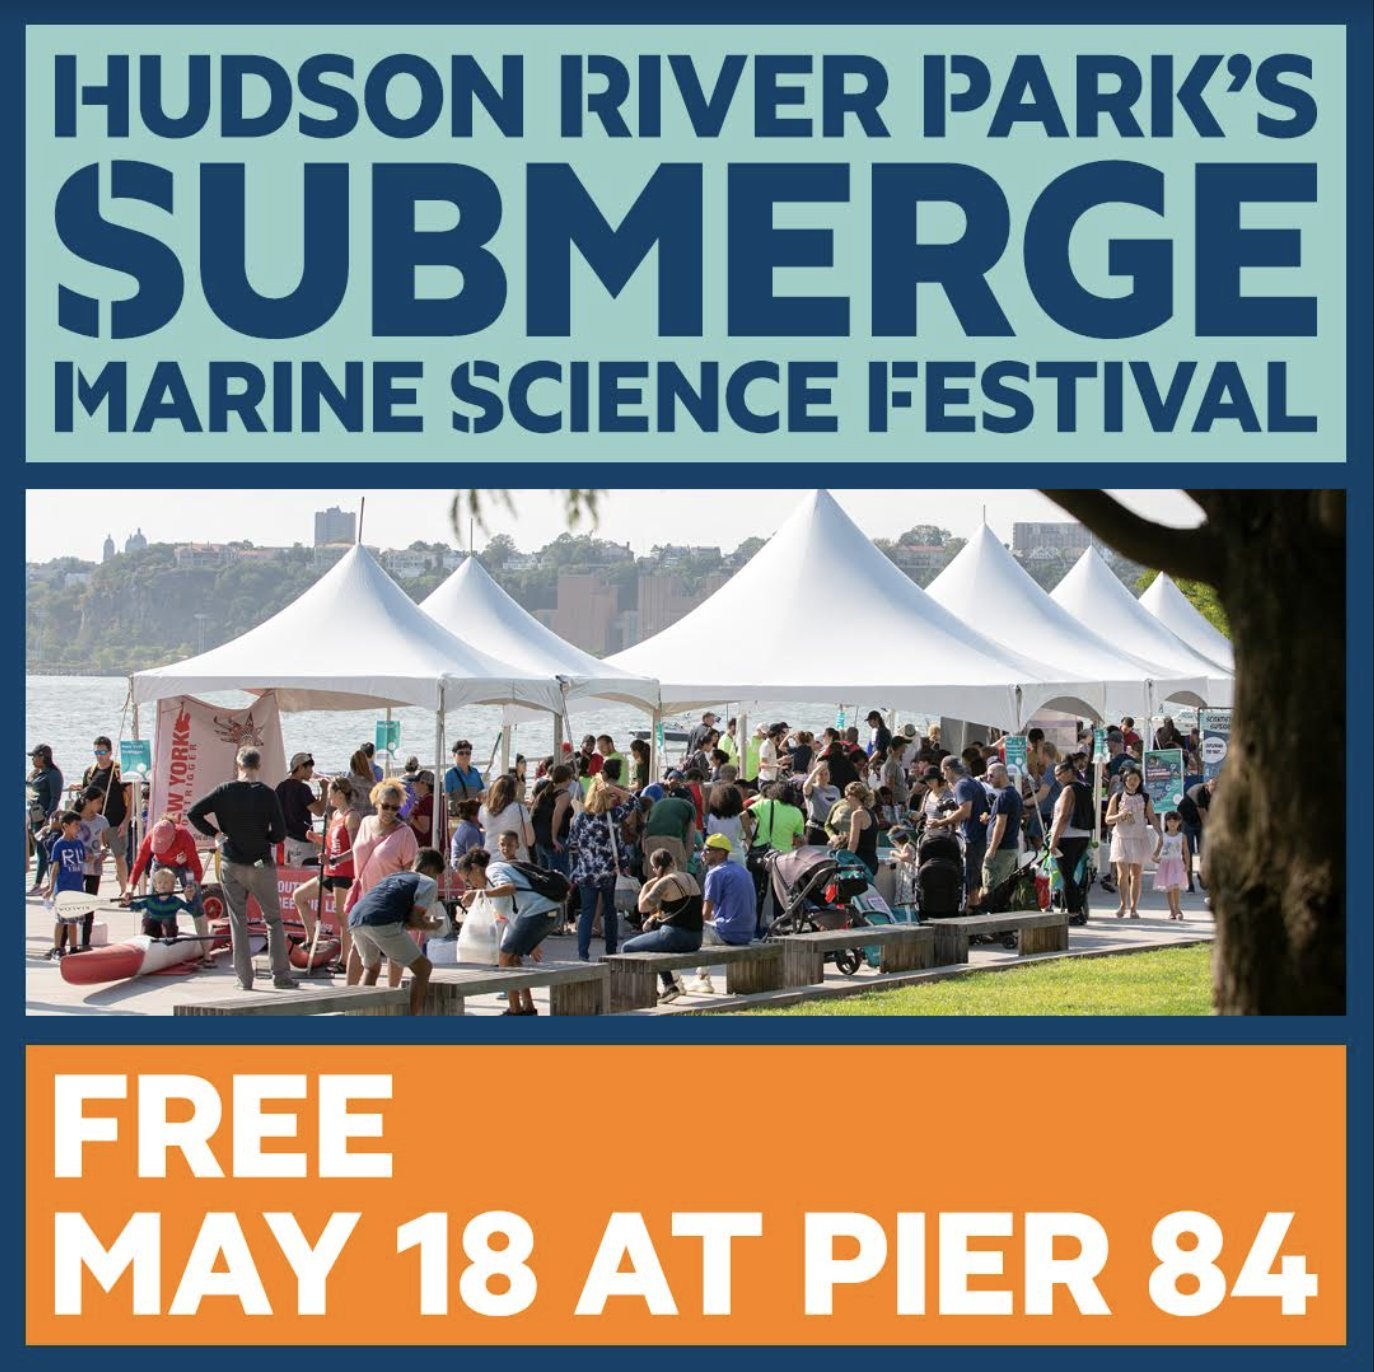 See you at @hudsonriverpark Submerge Marine Science Festival next week! 

Saturday May 18, 2024, from 11:00 AM - 3:00PM, at Pier 84

Join this free event to check out some of our latest work! 

No sign ups required 🪴 

#hudsonriverpark #hudsonriverp